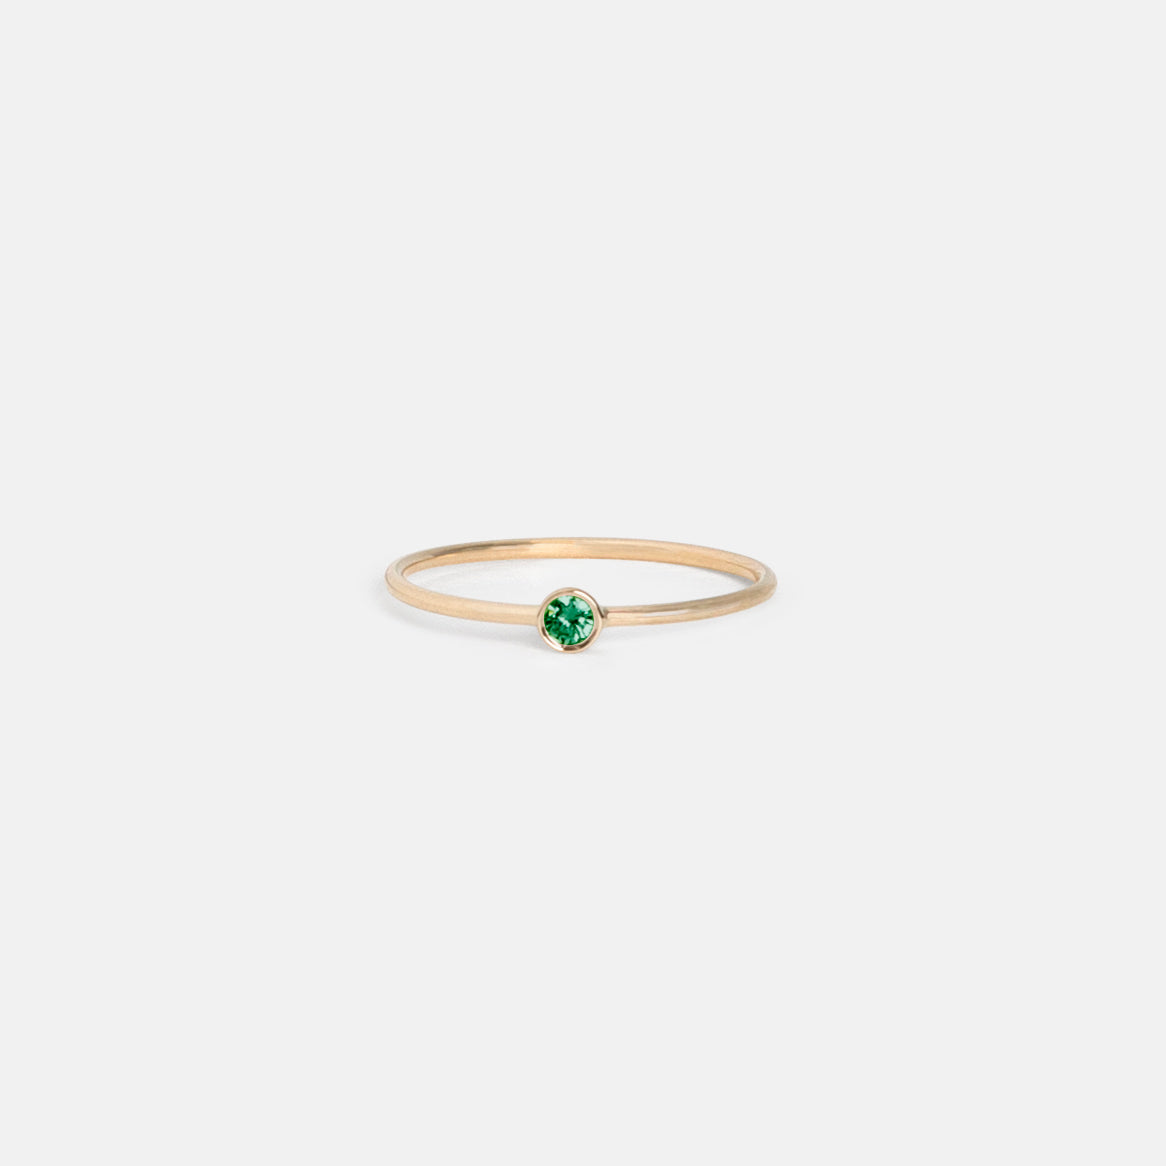 Large Kaya Ring in 14k Gold set with Emerald by SHW Fine Jewelry